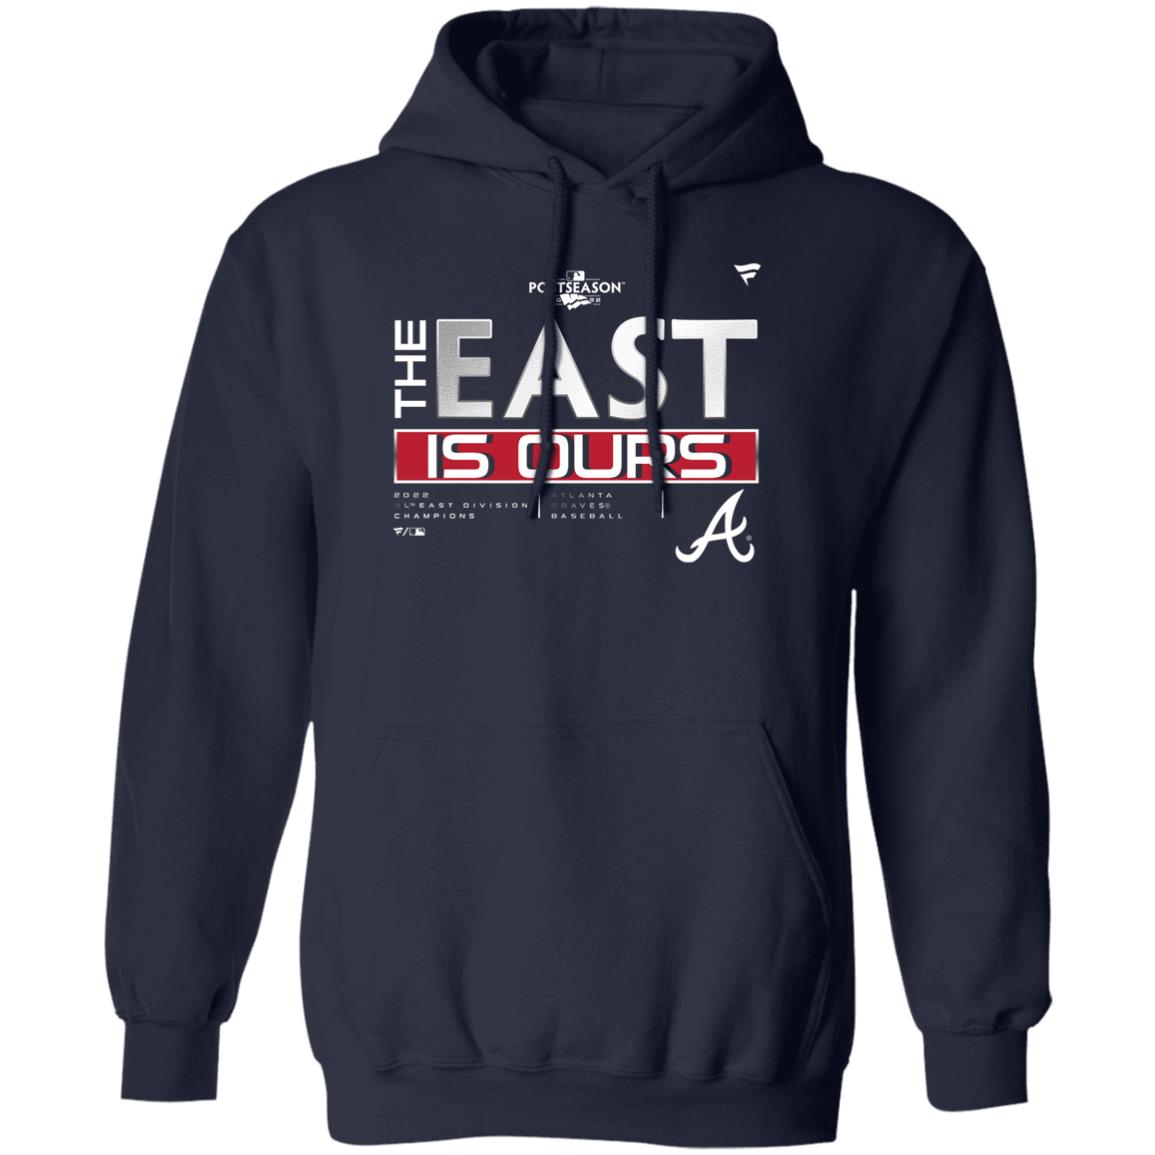 The East Is Ours Atlanta Braves Baseball 2022 Nl East Division